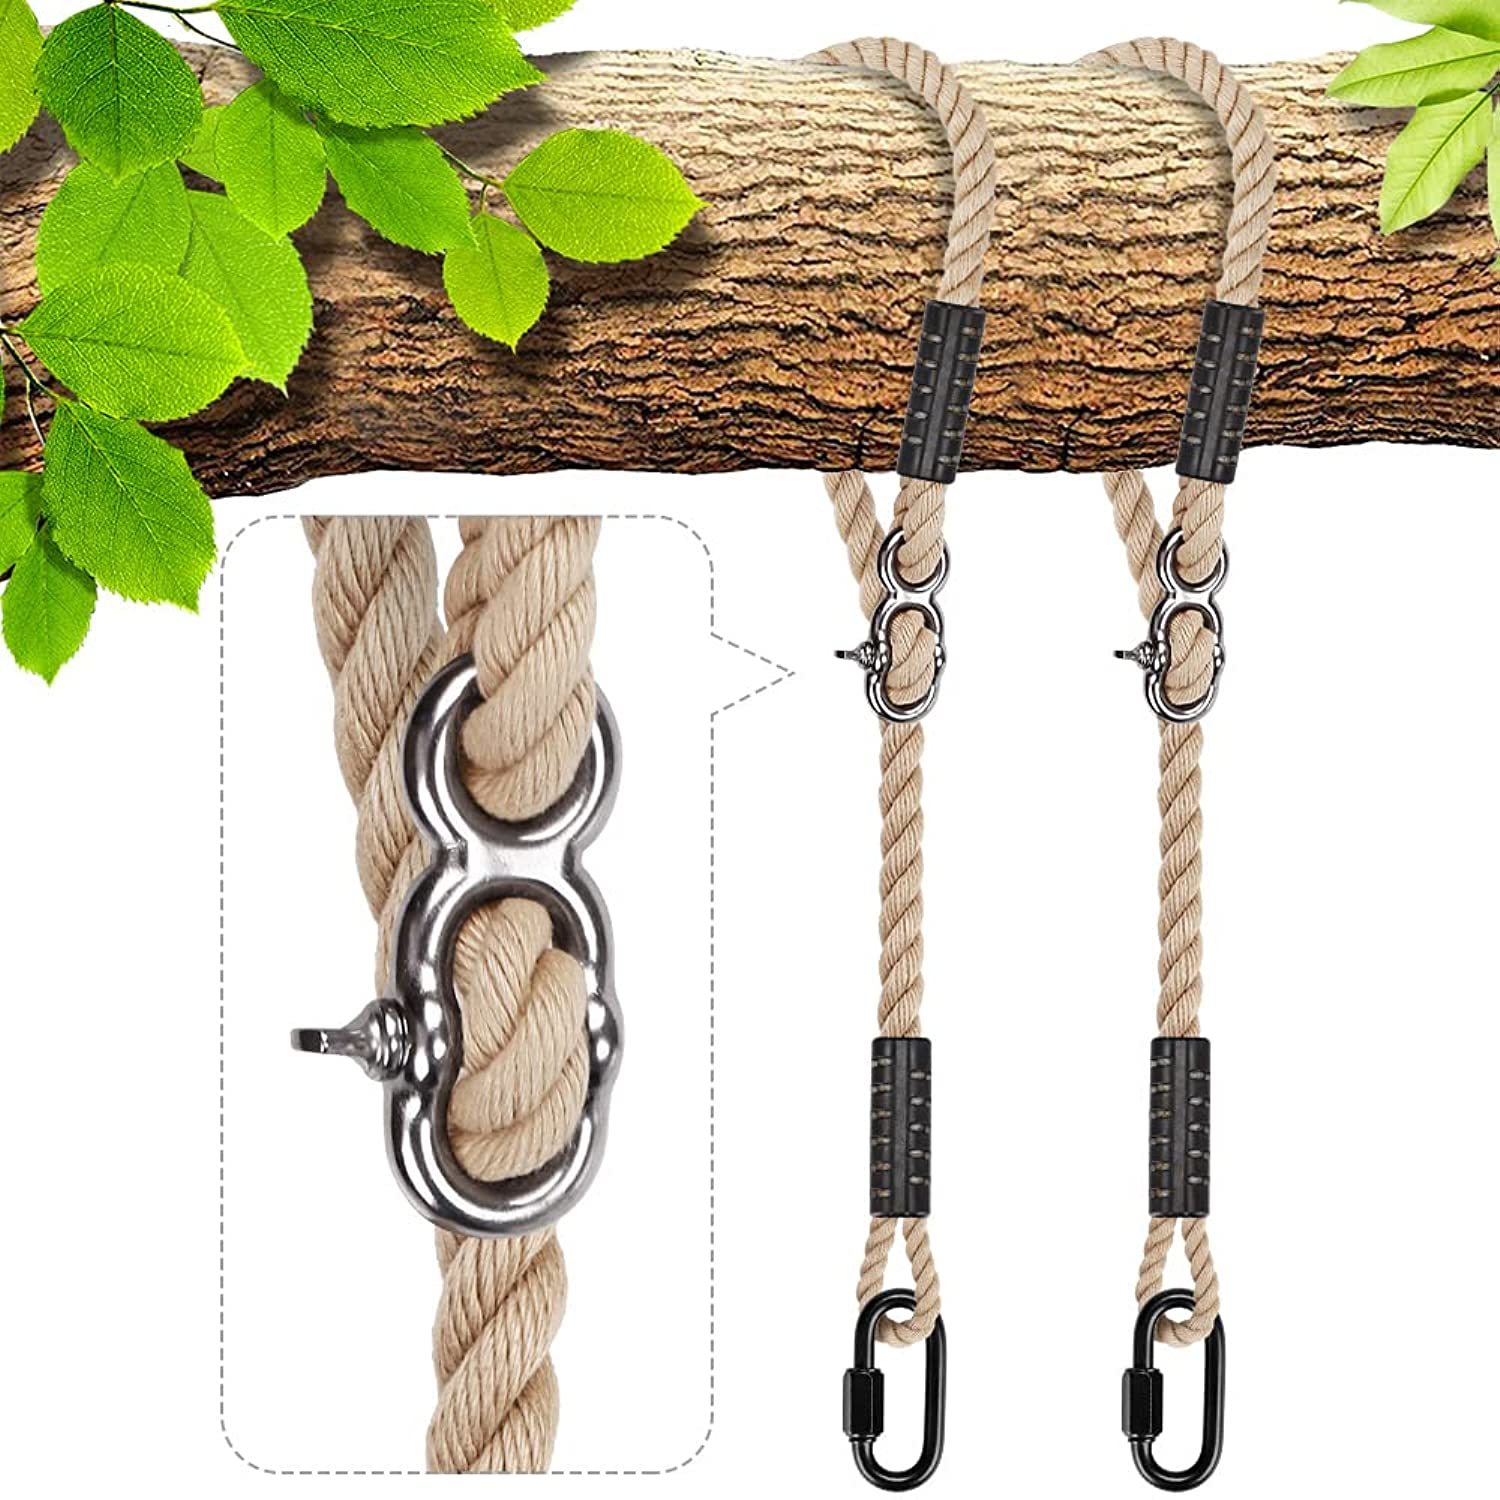 Tree Swing Ropes, Hammock Tree Swings Hanging Straps, Adjustable Extendable, For - $37.99